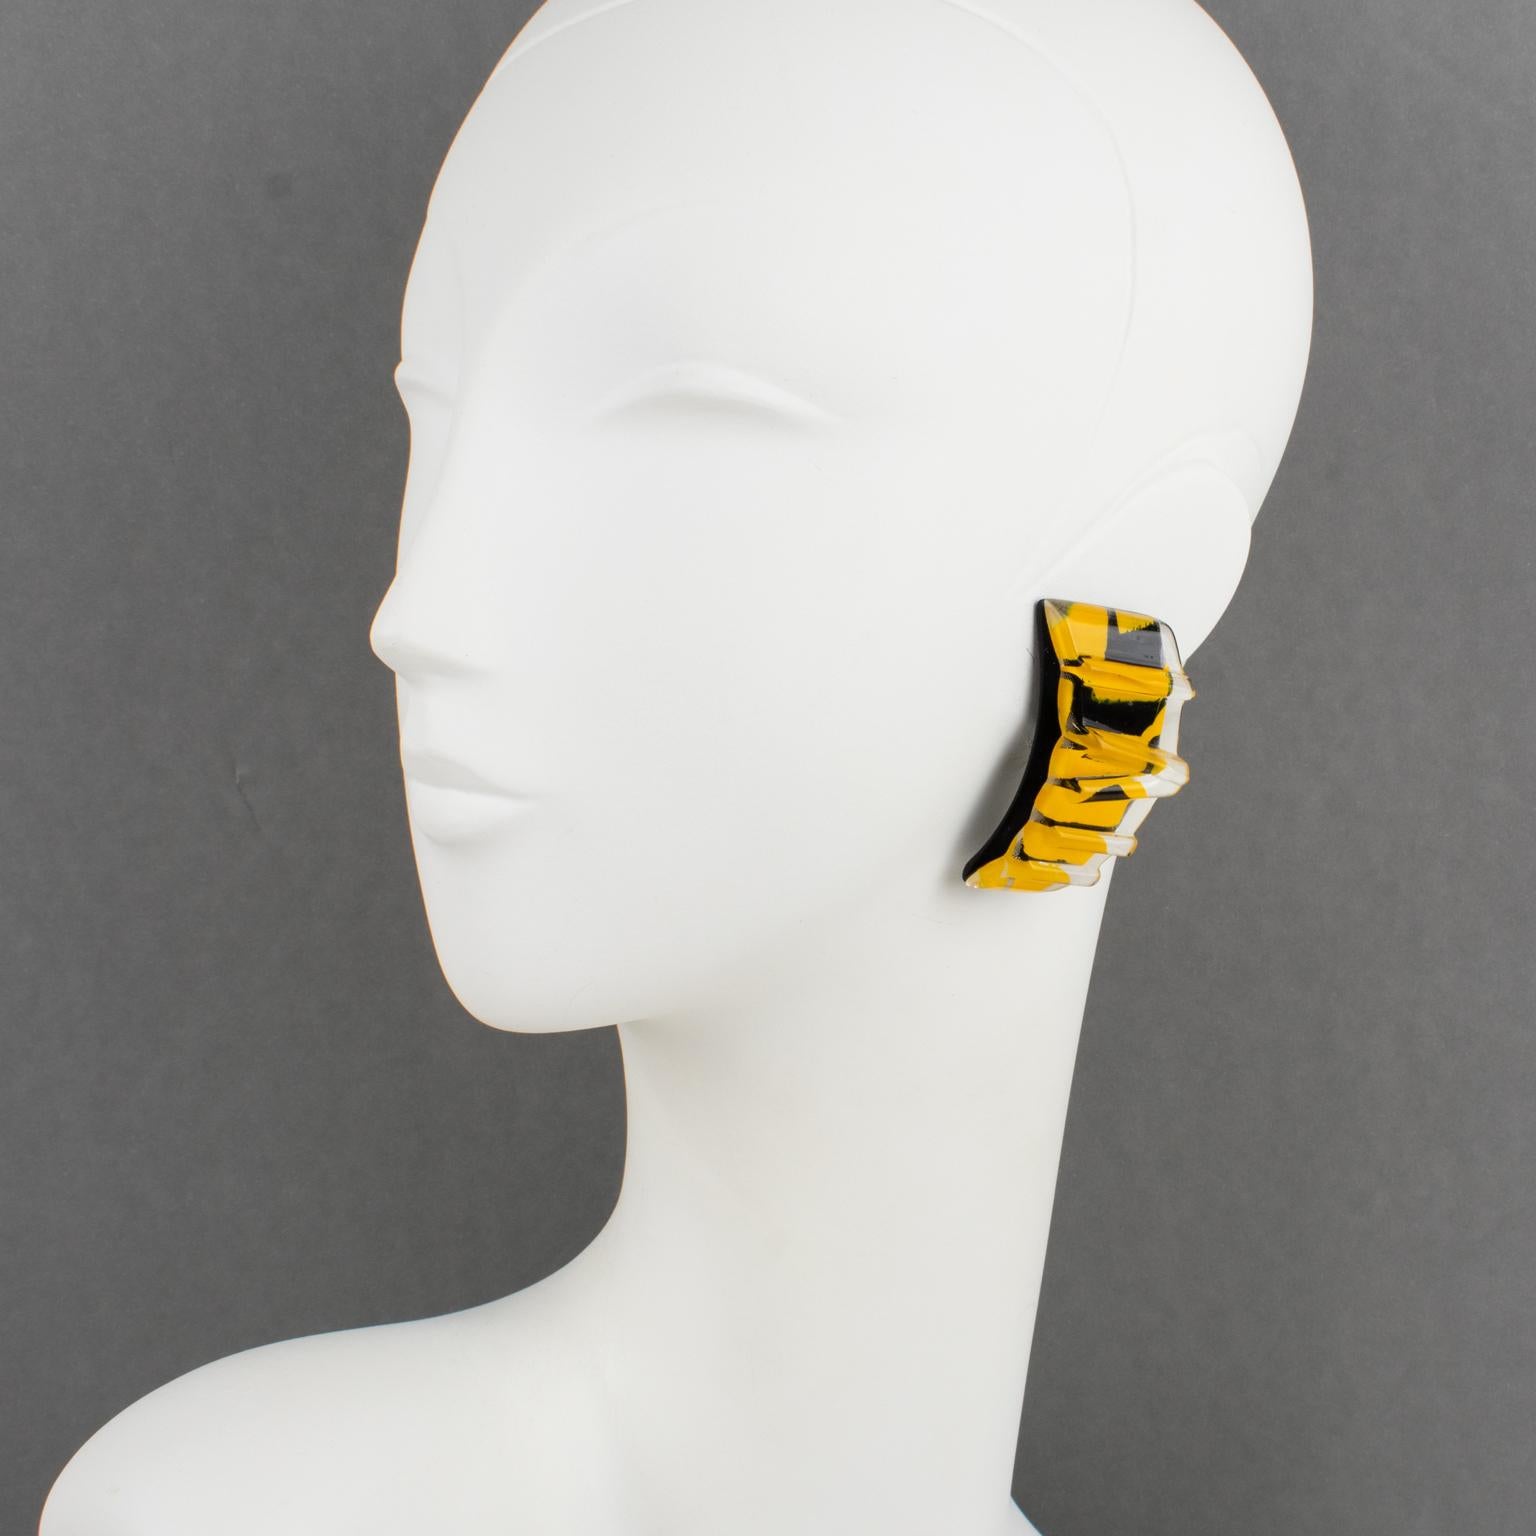 Harriet Bauknight designed these gorgeous Lucite clip-on earrings for her brand Kaso in the 1980s. The pieces feature a large dimensional elongated curved shape with a carved striped pattern design in black and yellow colors inclusions. The Kaso